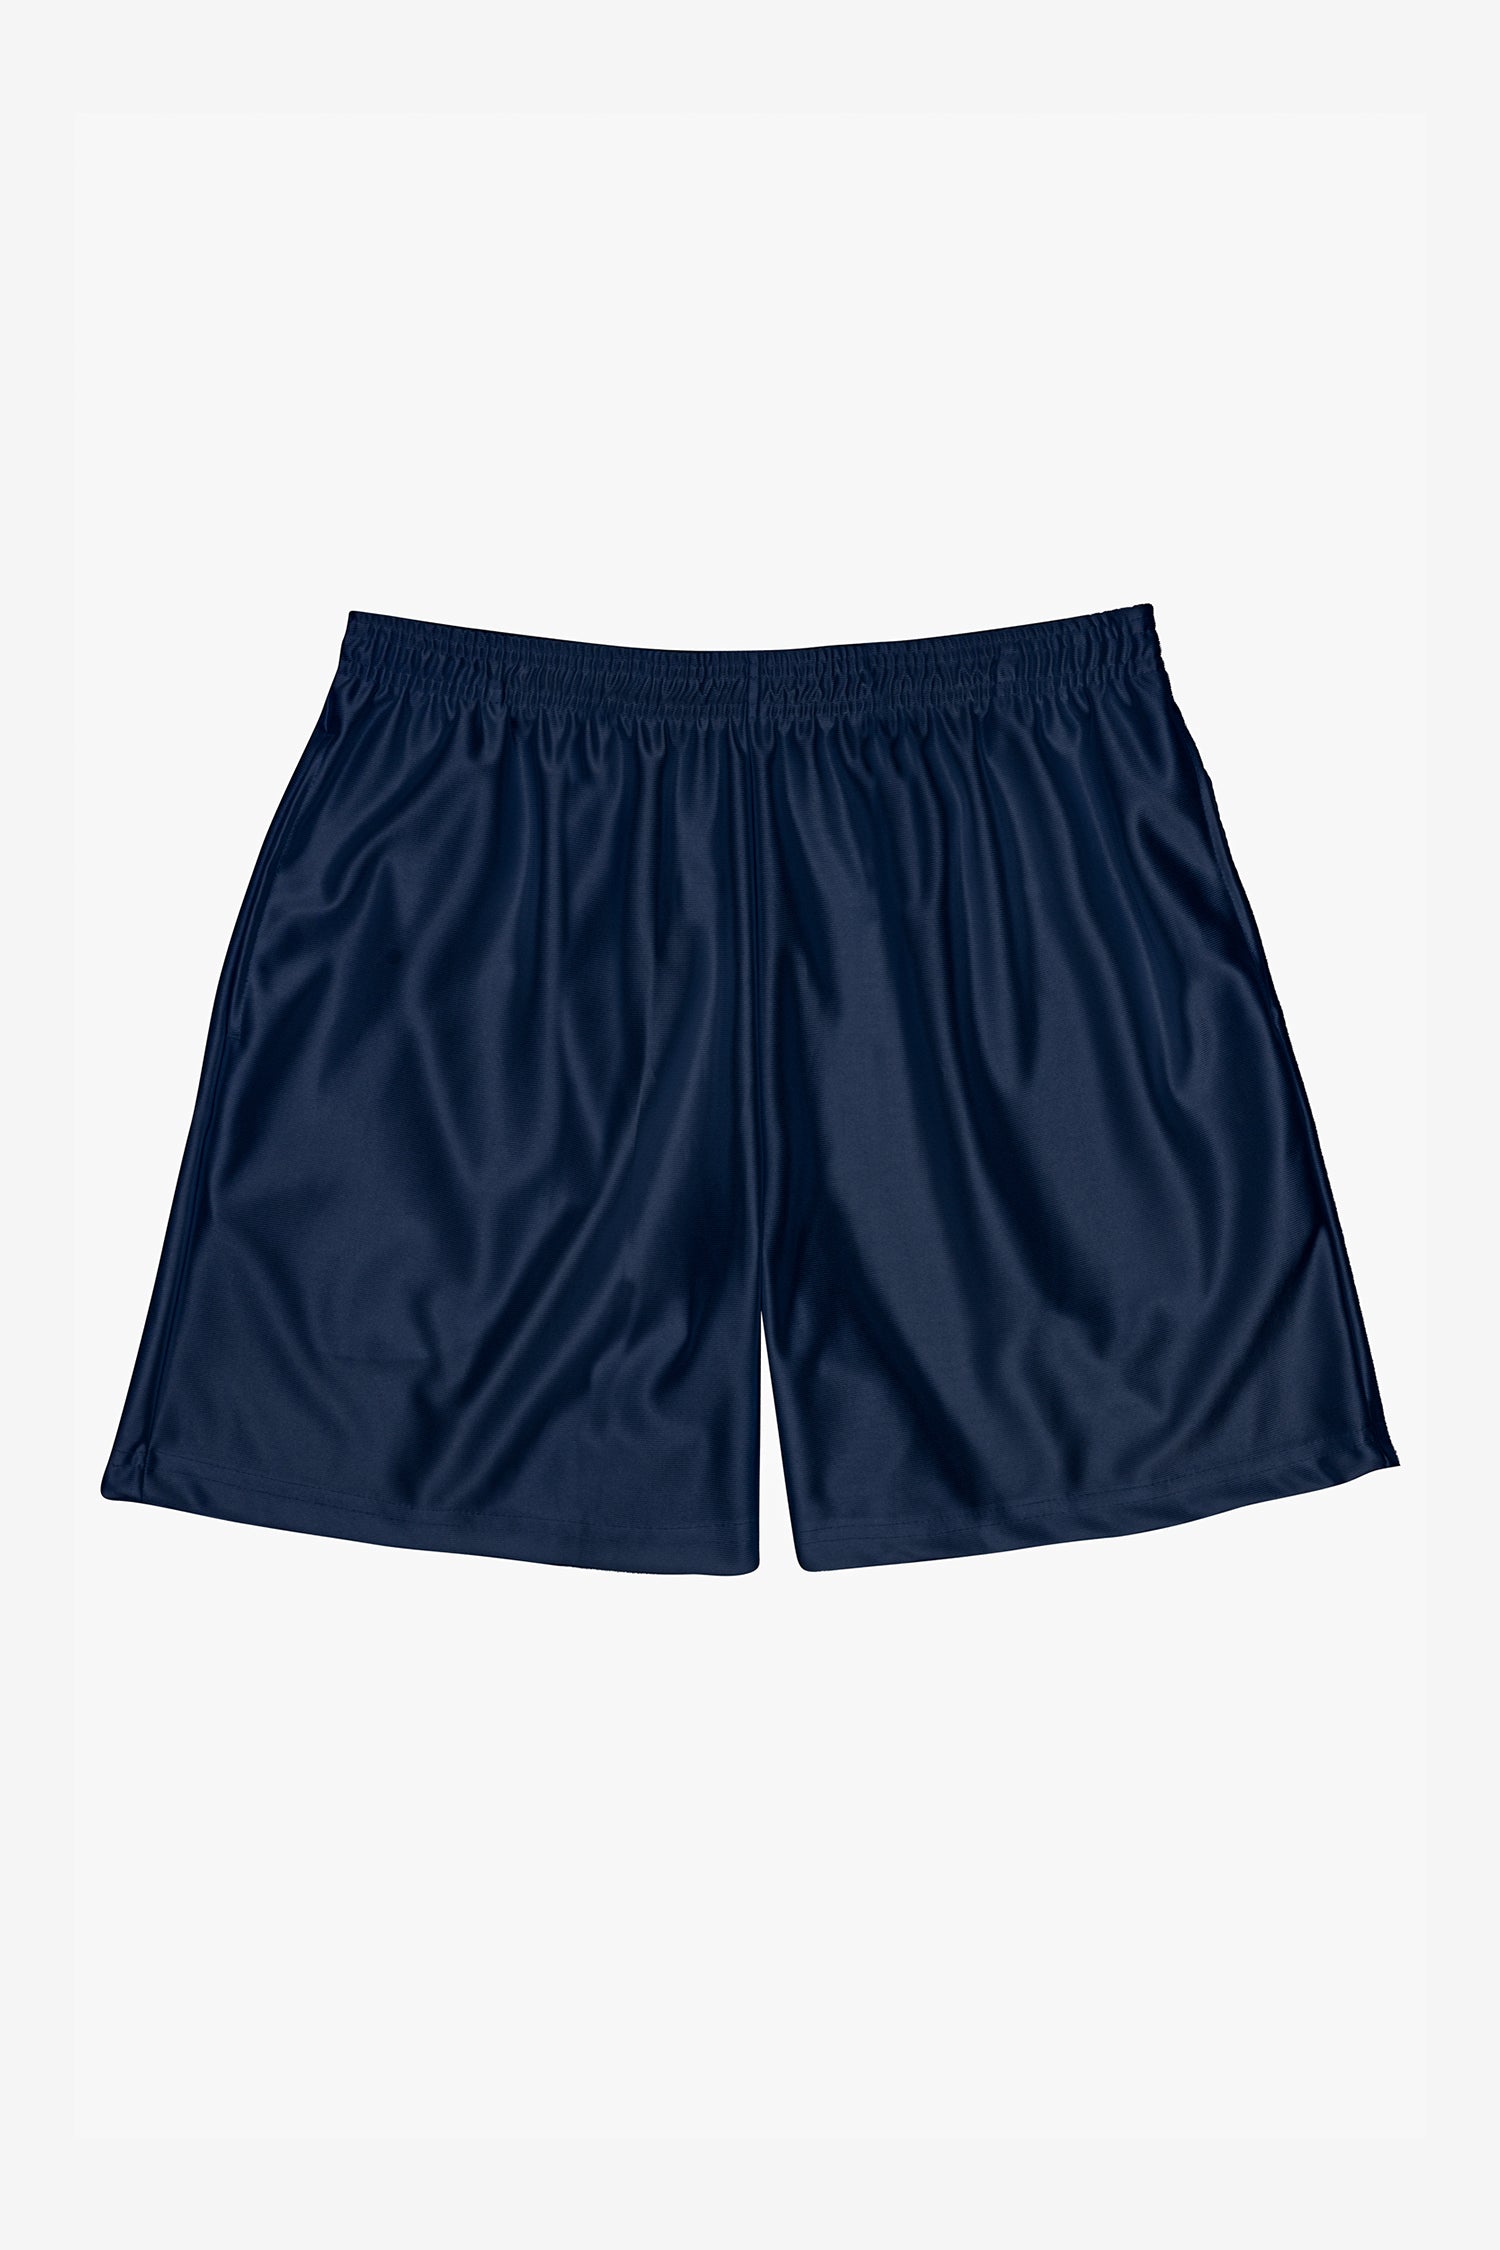 AYBL Solid Blue Athletic Shorts Size S - 62% off